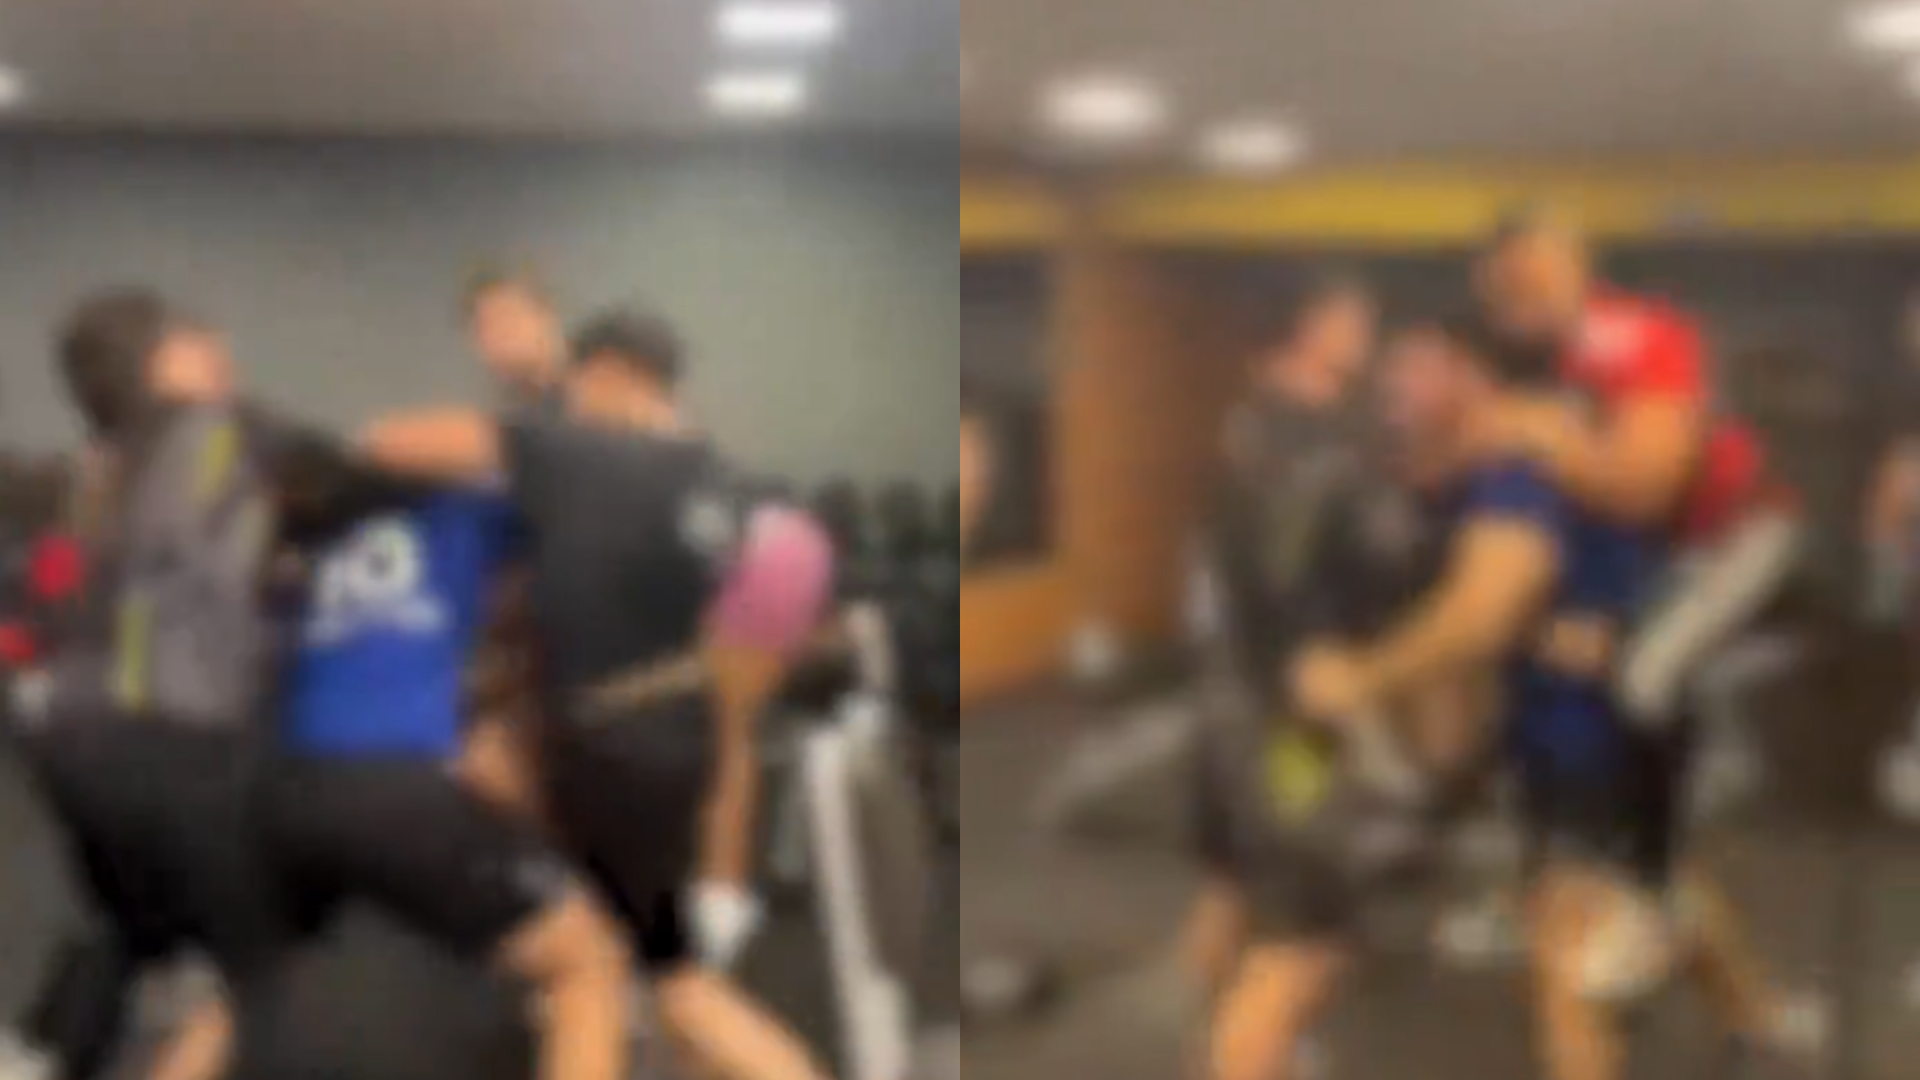 Video: Debauchery during exercise ends with a severe beating in the BH gym